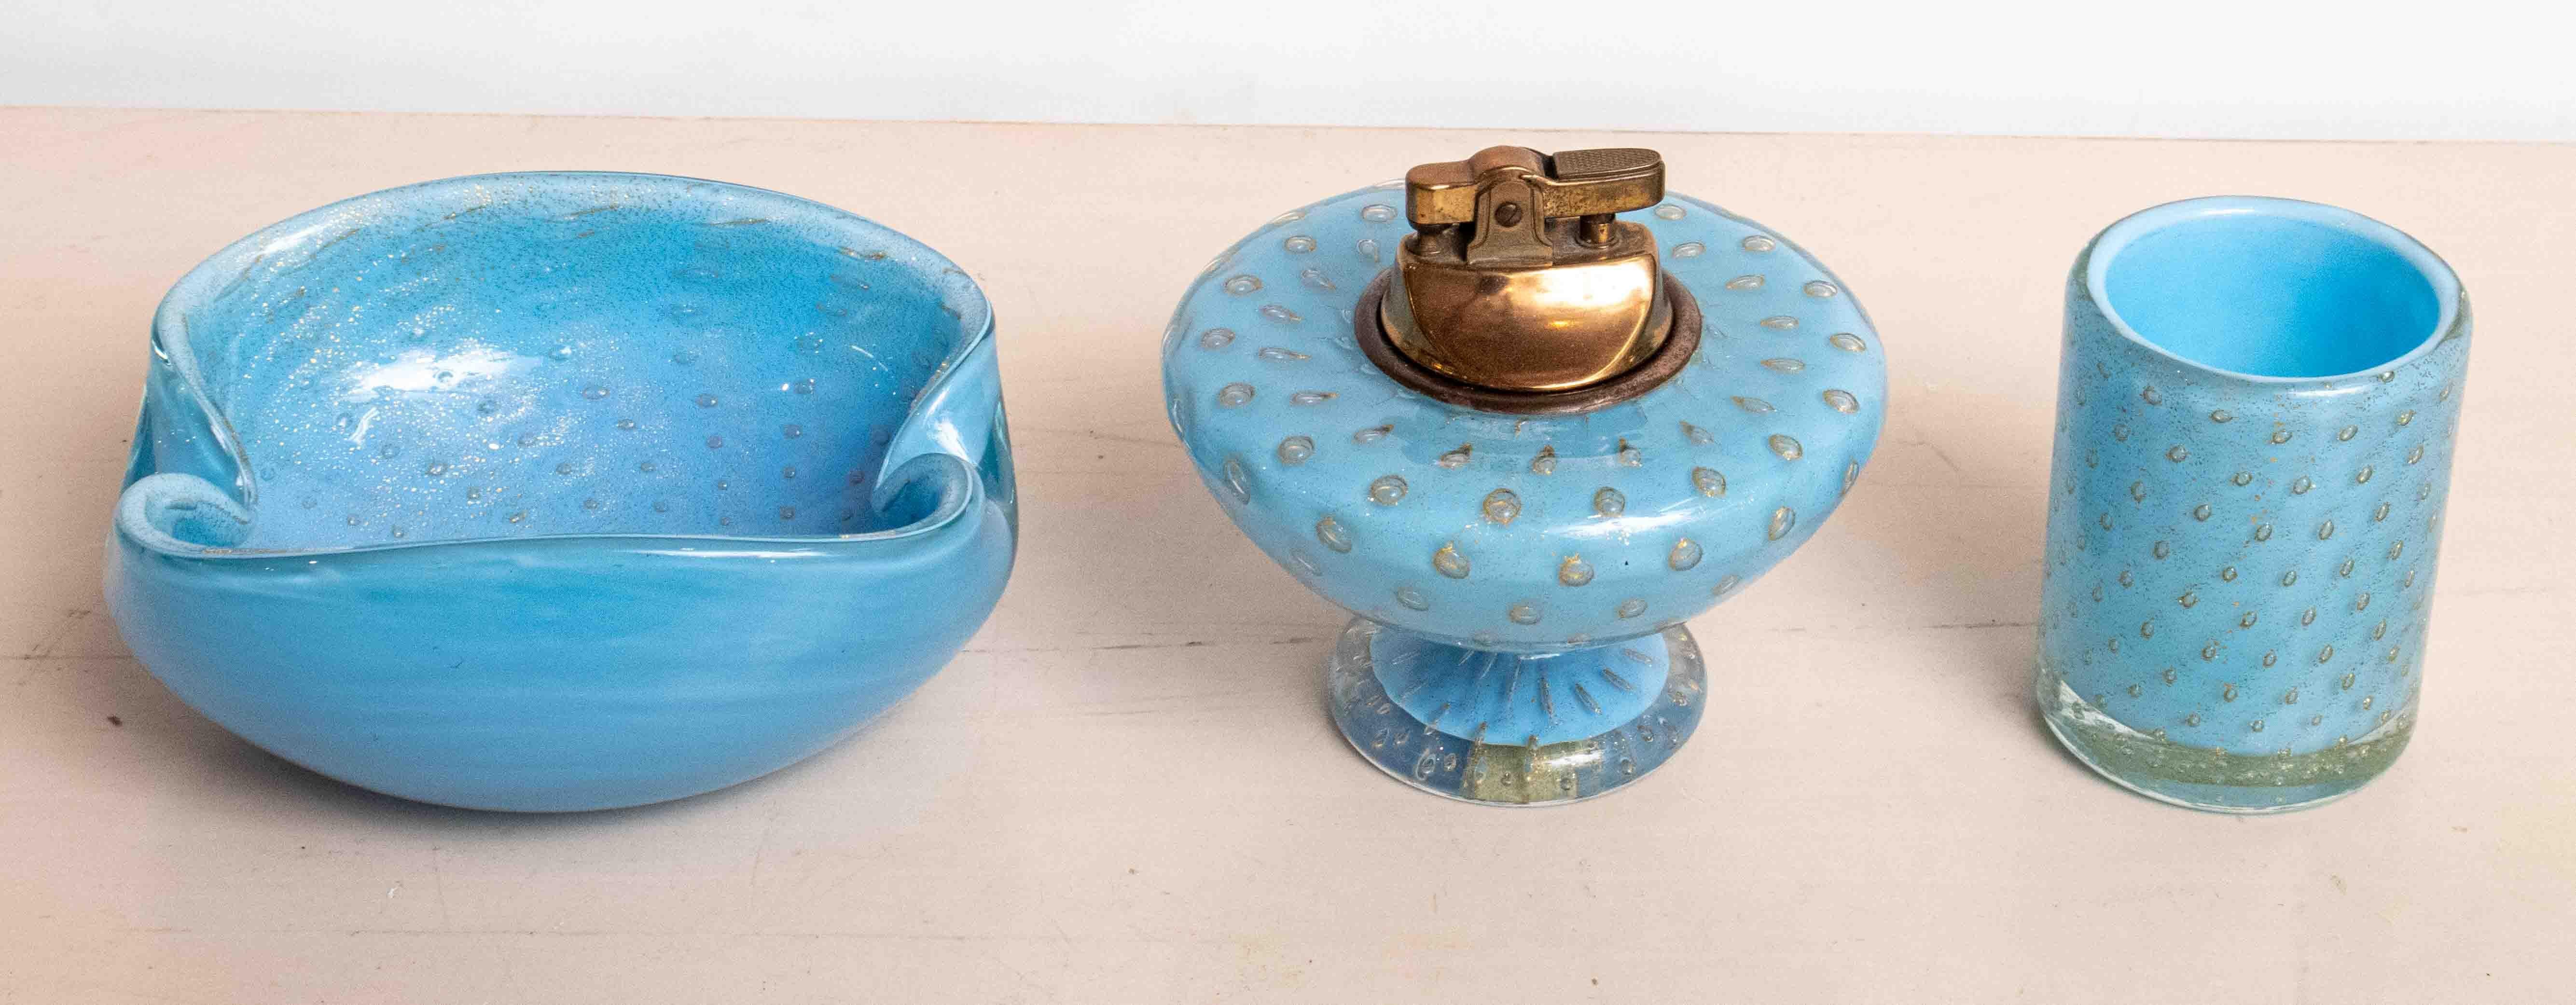 1950's Italian Murano Glass Smoking Set. Set included a glass to store matchsticks, a lighter, and a bowl for cigars/cigarettes. Blown bubble glass attributed to Barovier and Toso. Measurements: Glass 2